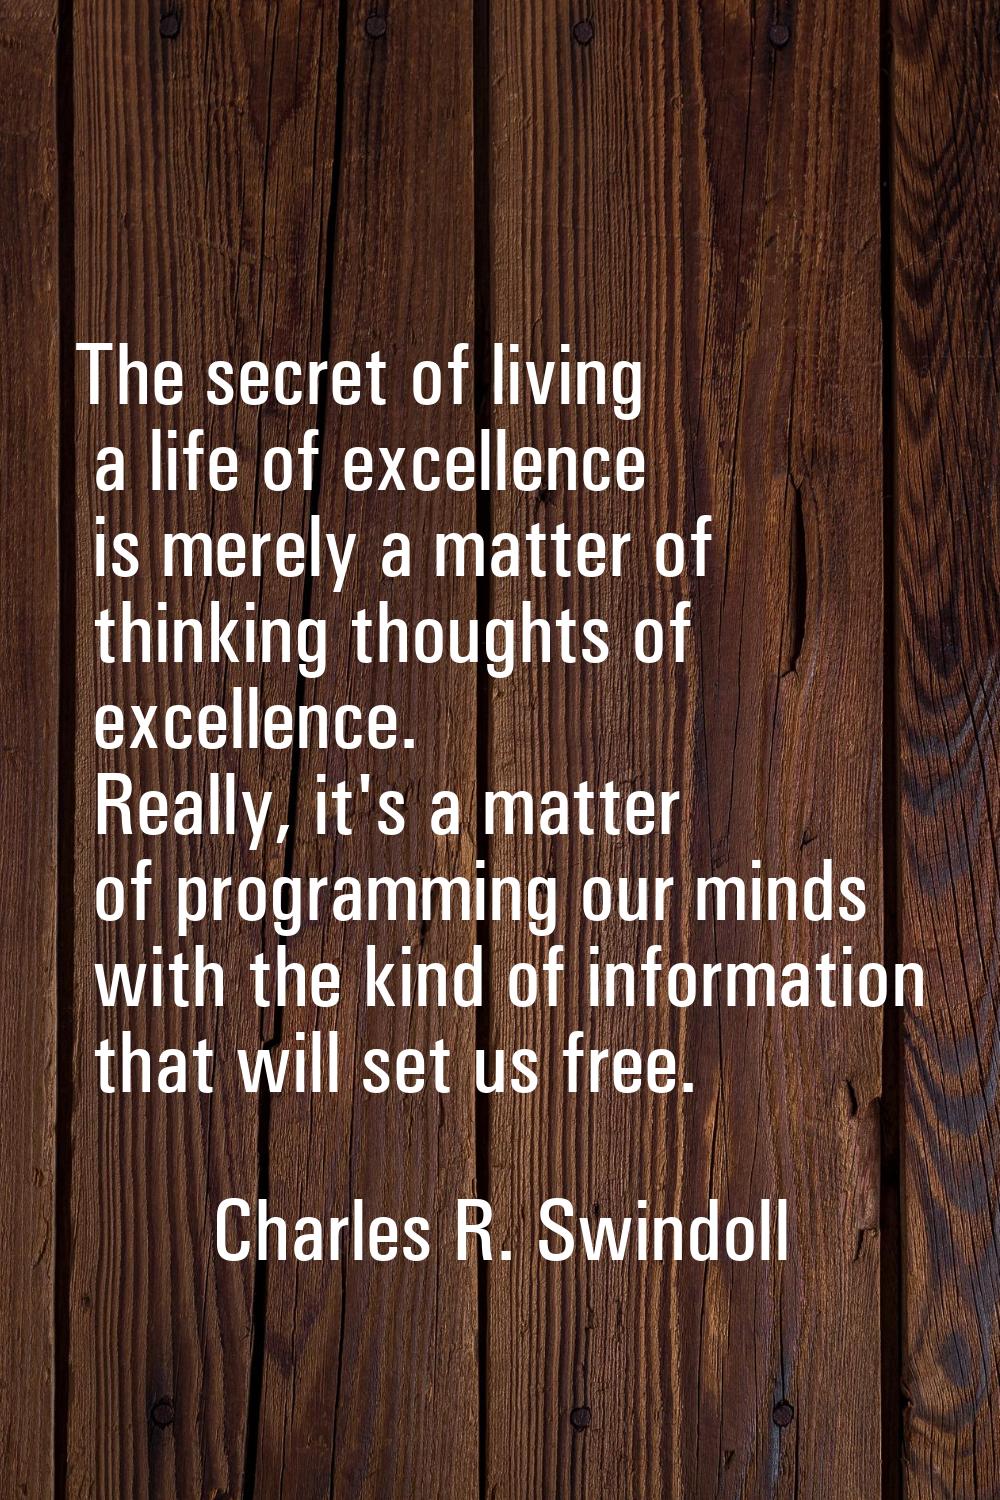 The secret of living a life of excellence is merely a matter of thinking thoughts of excellence. Re